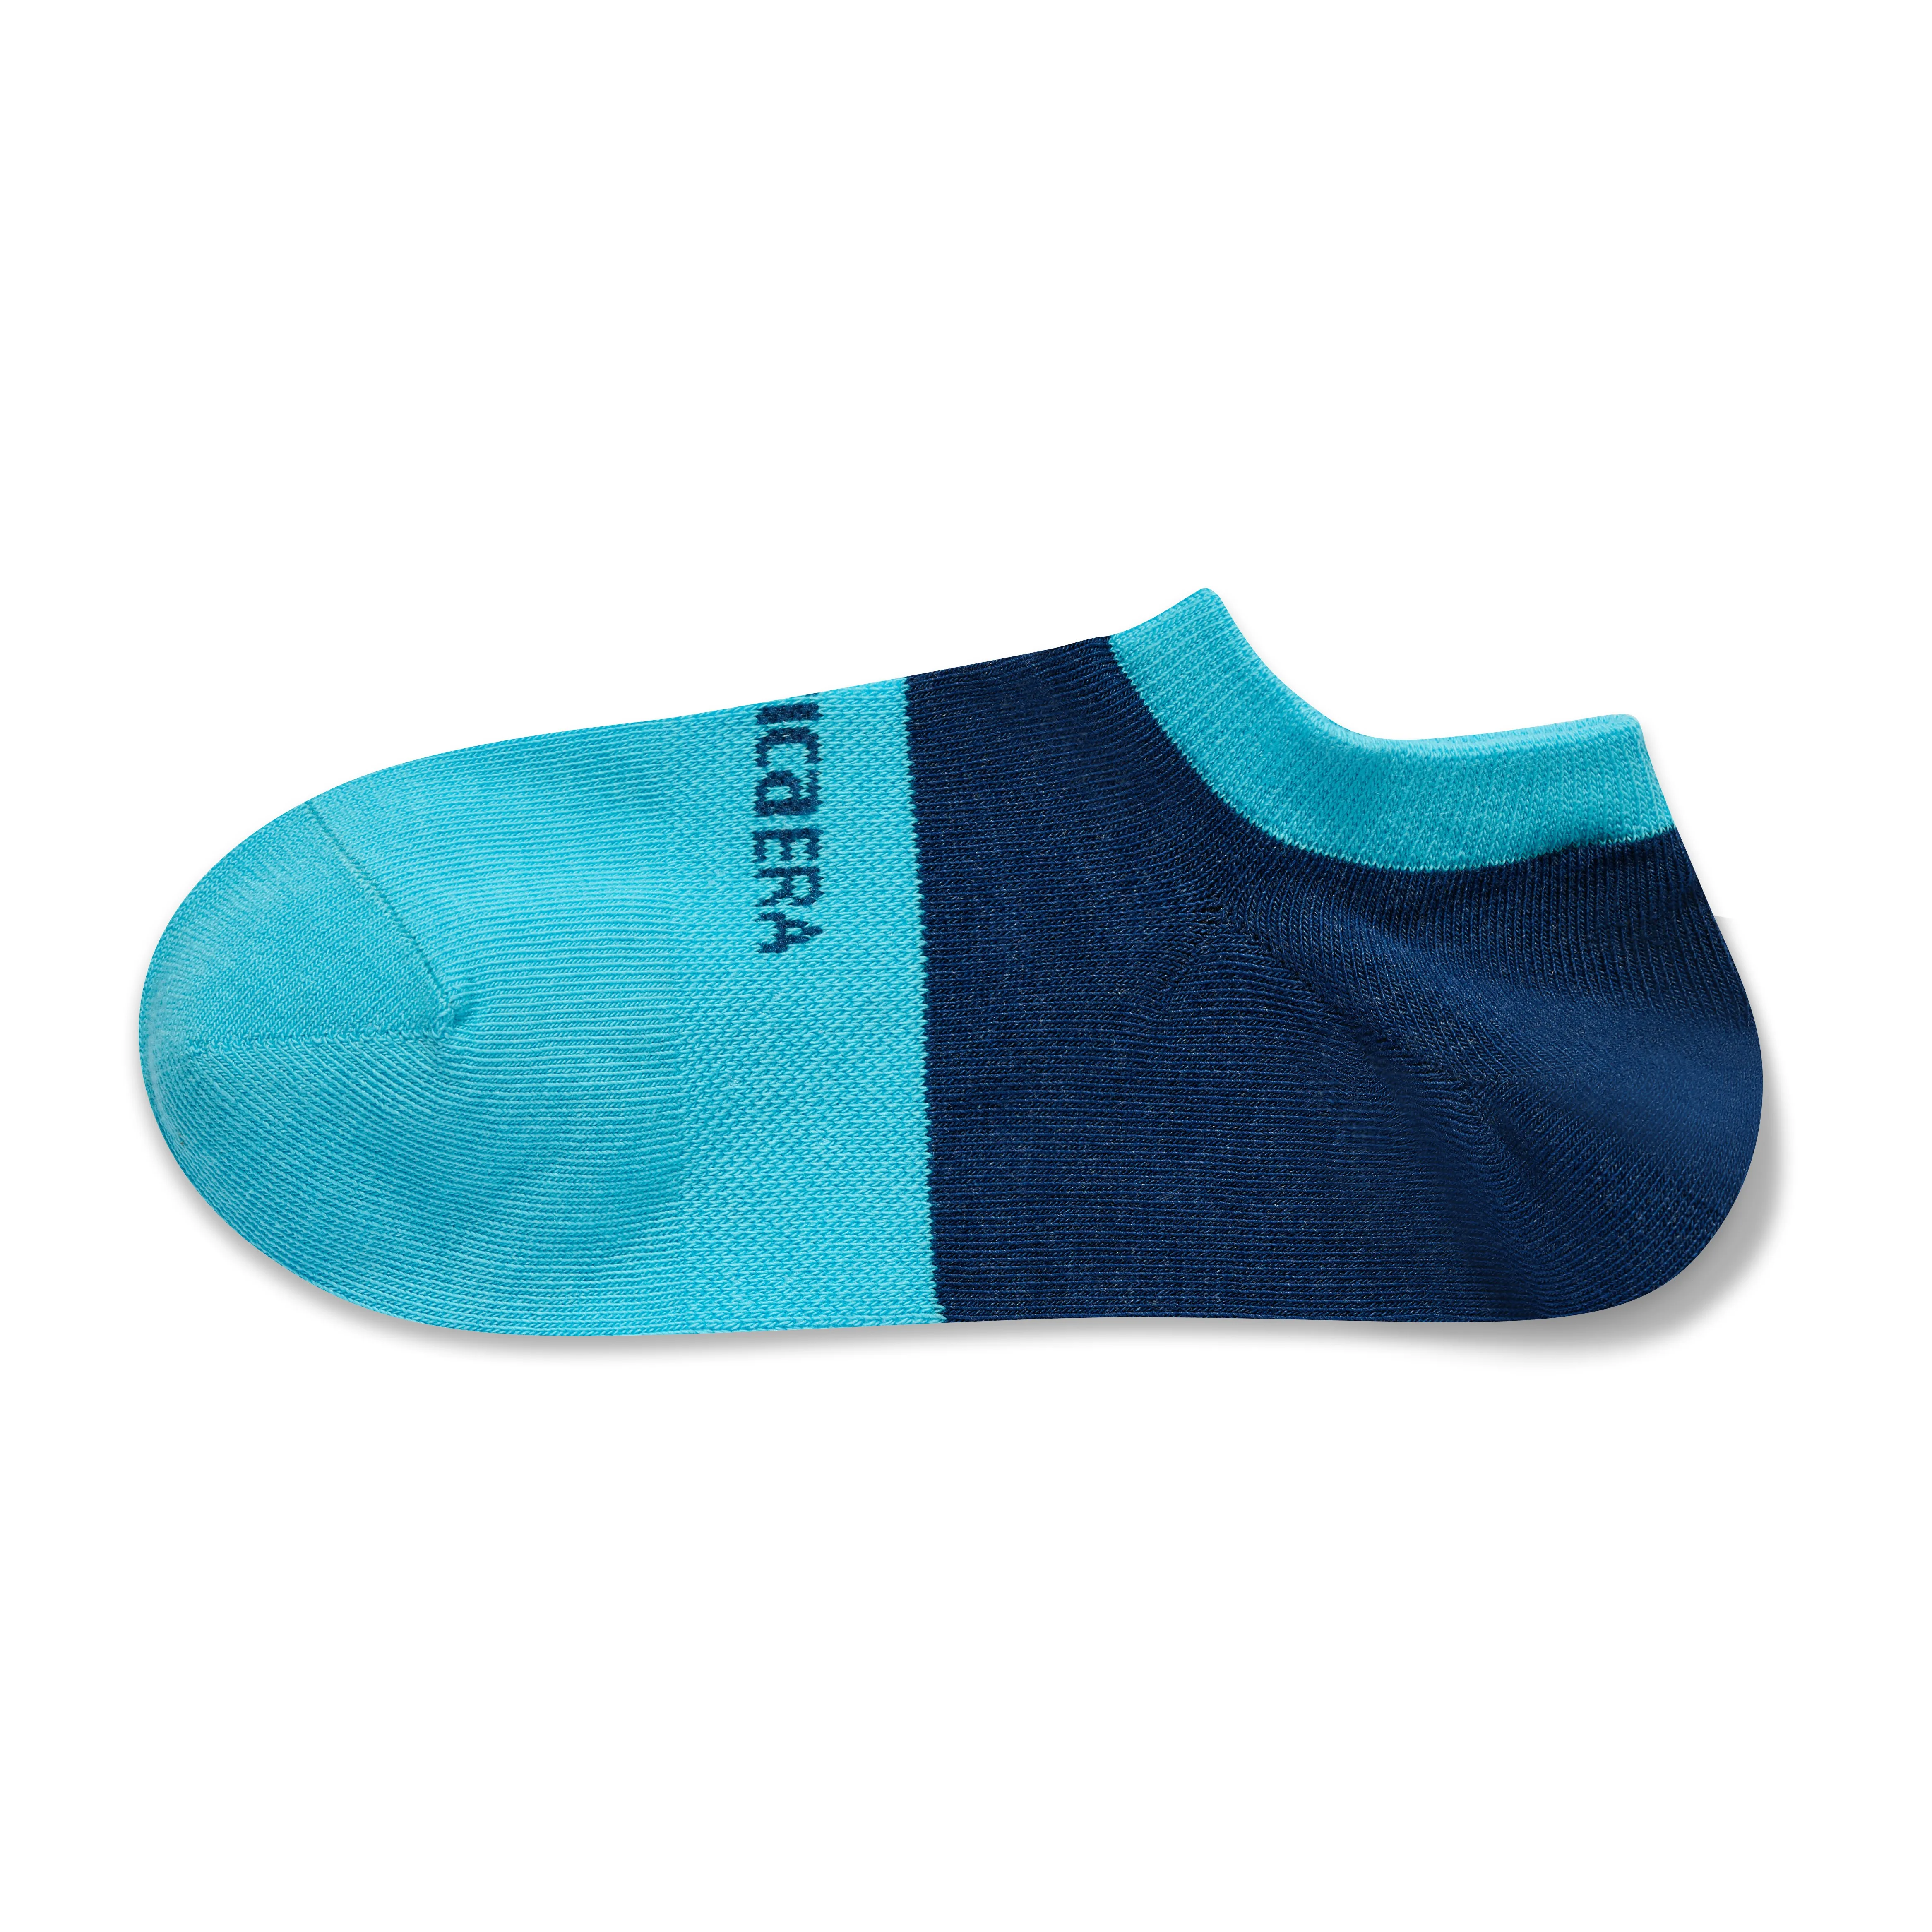 

New coming Say goodbye to smelly feet- New Functional Additive-free Anti bacterial Odor-free socks men's Socks No Show Socks